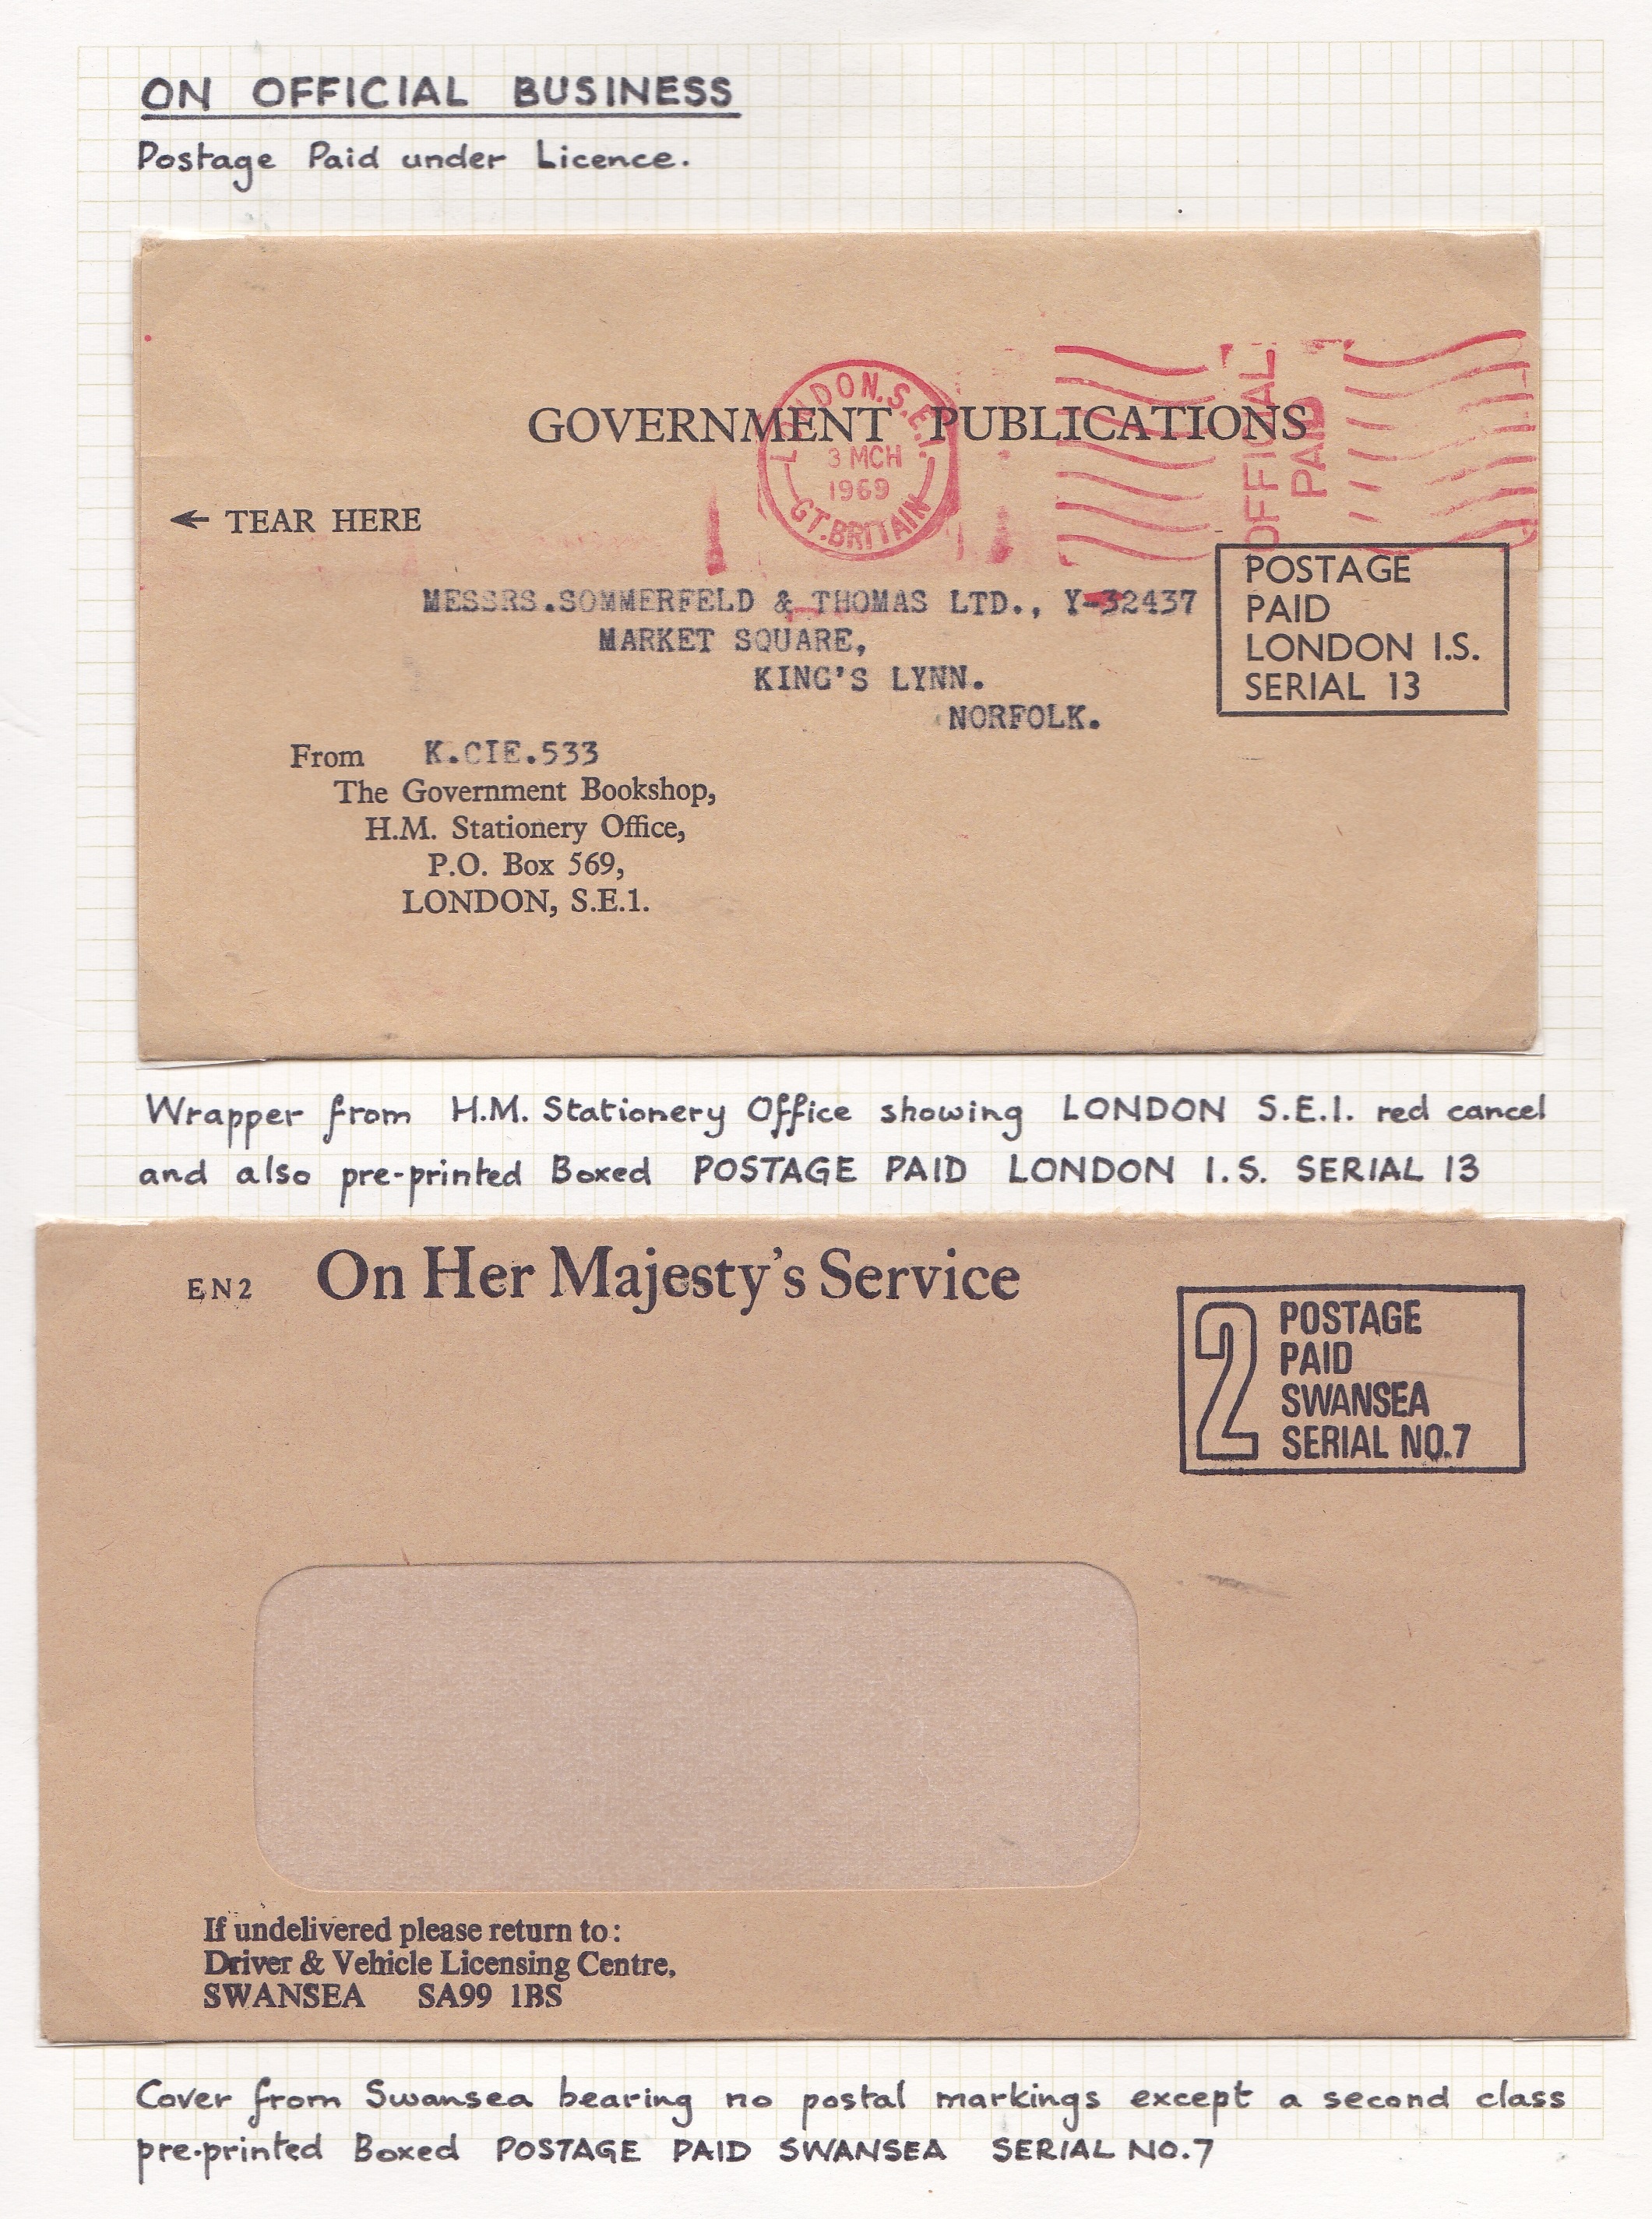 Great Britain - Fine collection of (38) Covers and Labels showing a wide variety of official